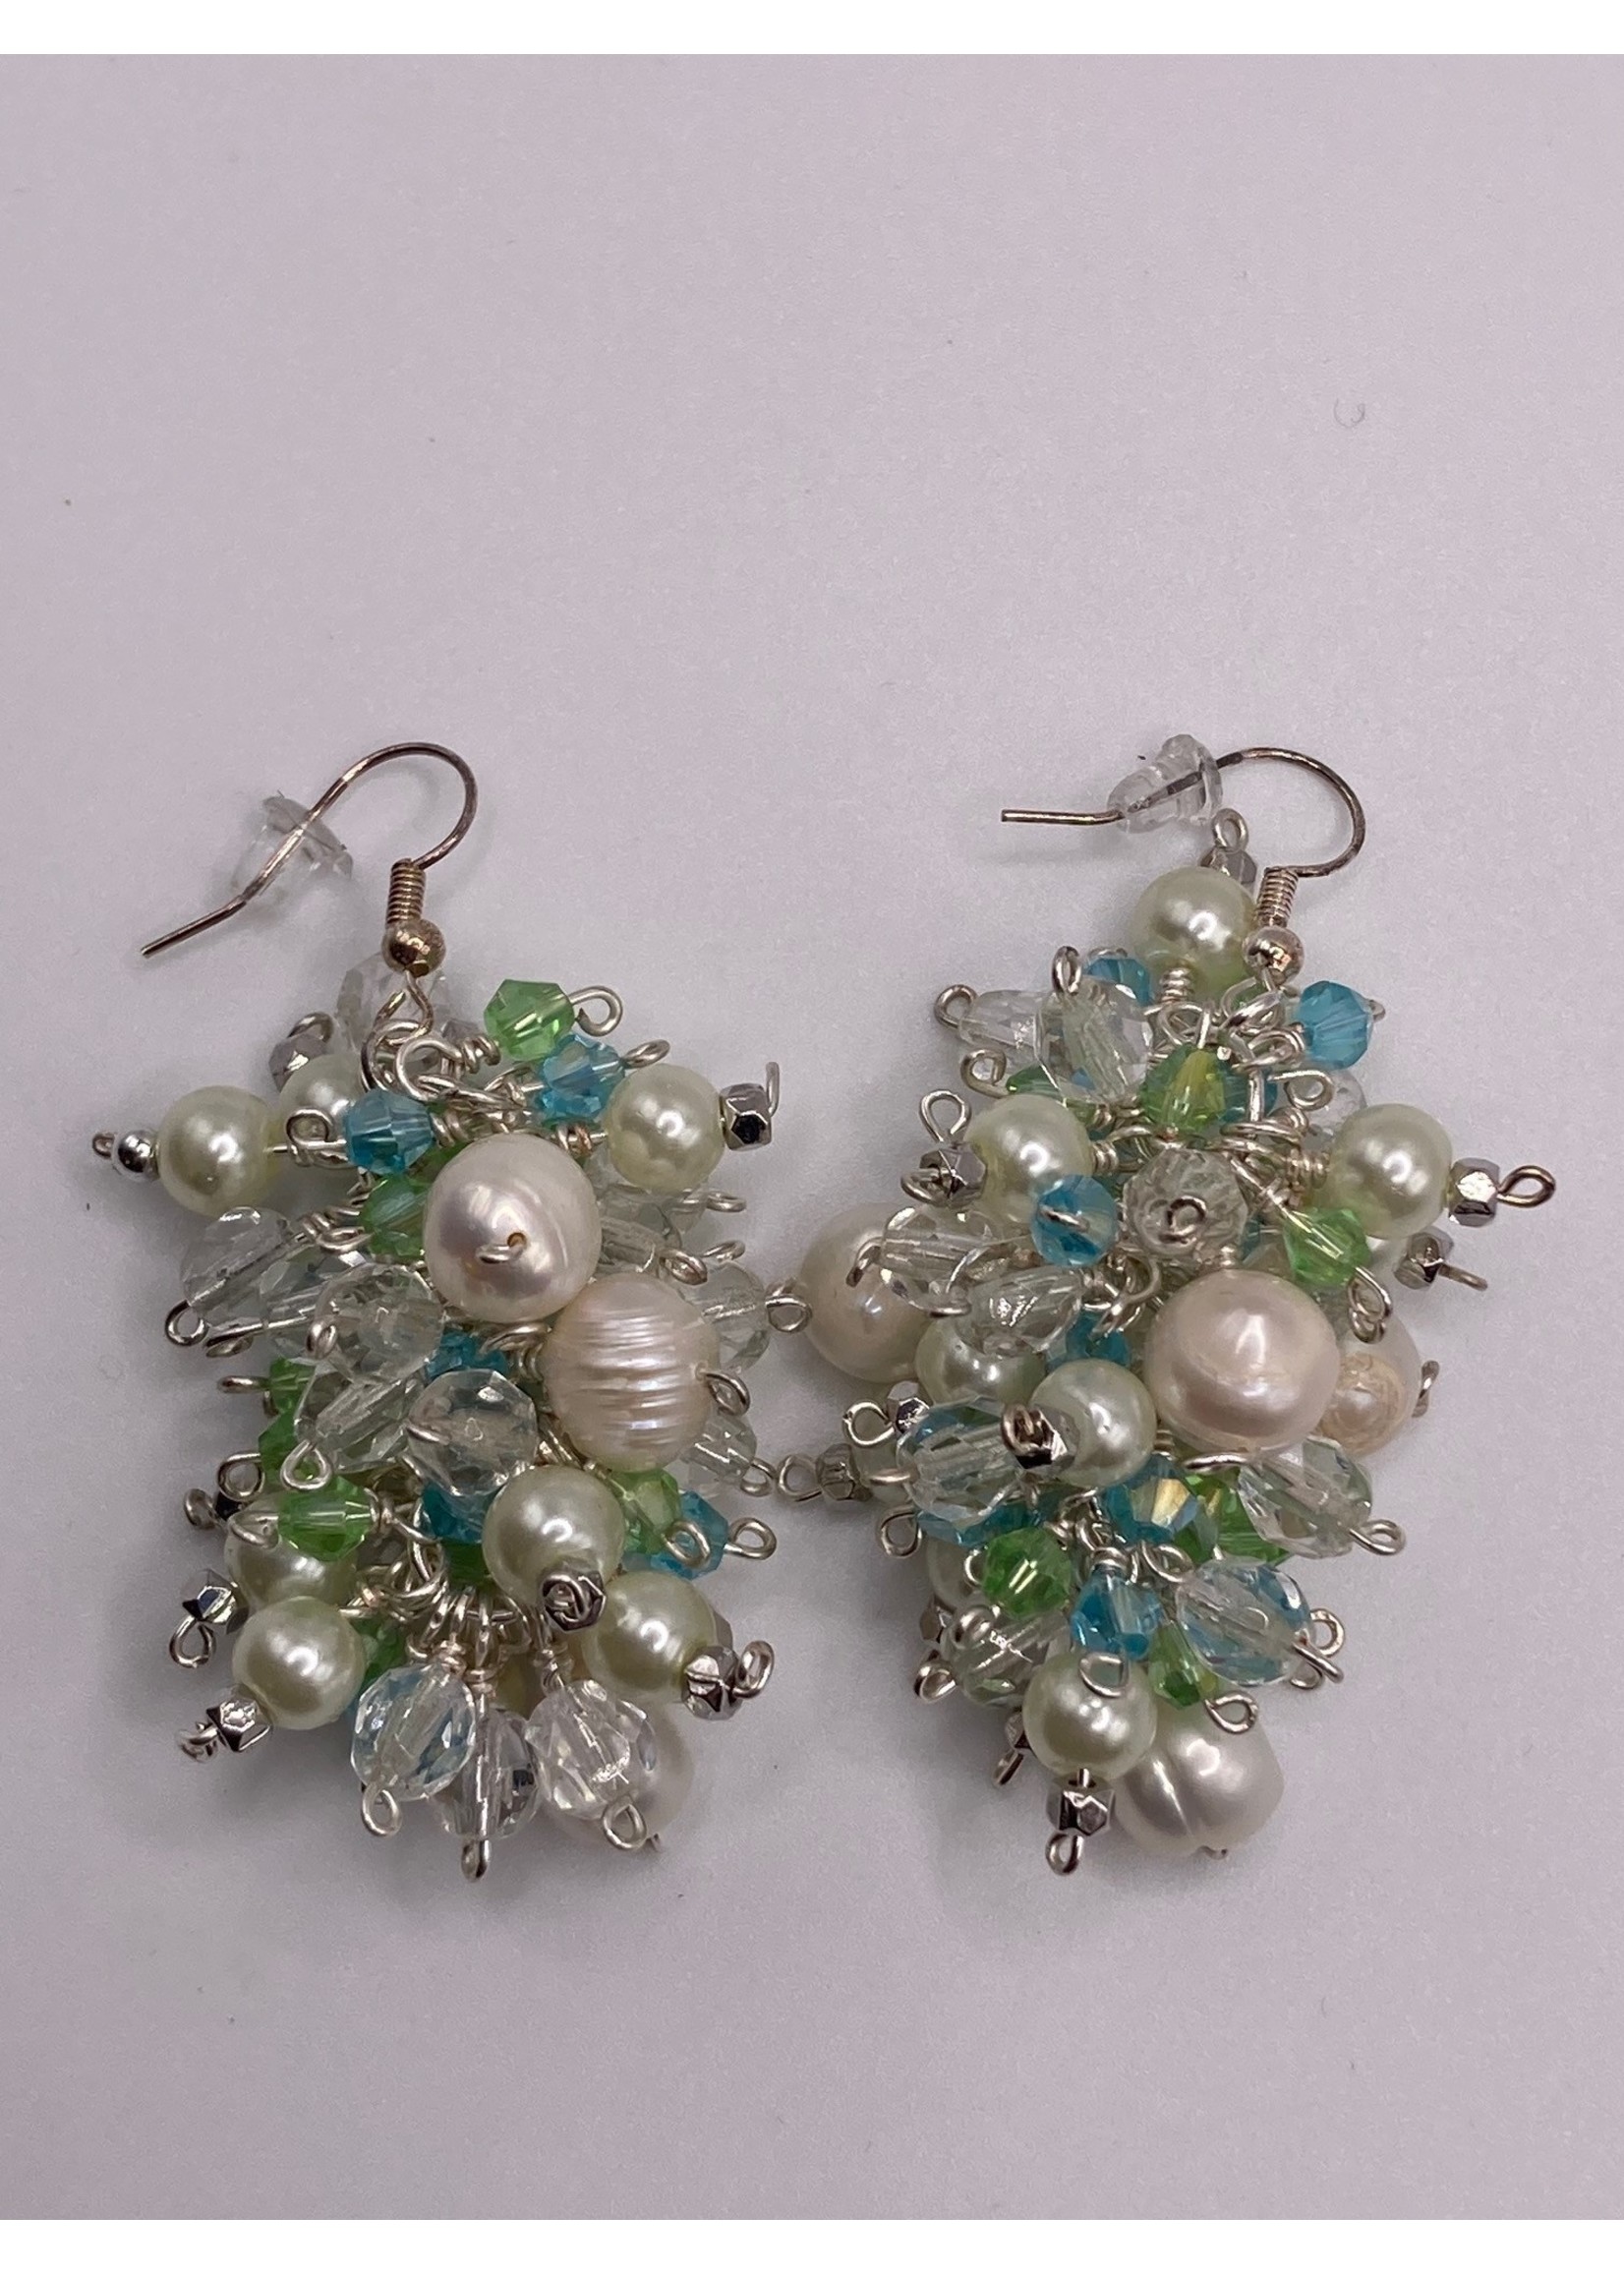 Our Twisted Dahlia Cluster of Freshwater Pearls, Preciosa Crystals in Blues and Greens with Silver Accent Earrings